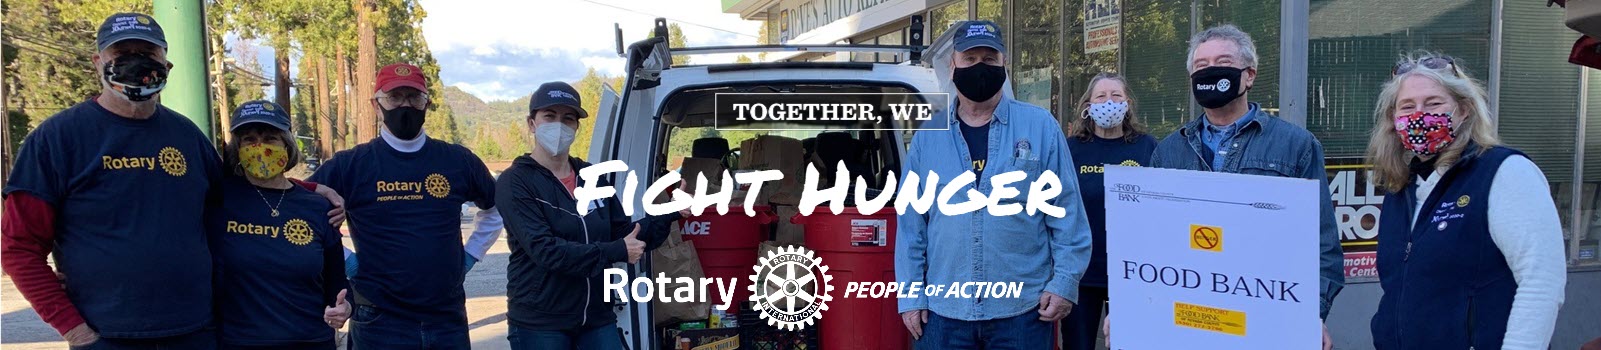 Together we fight hunger and meet urgent needs of our community